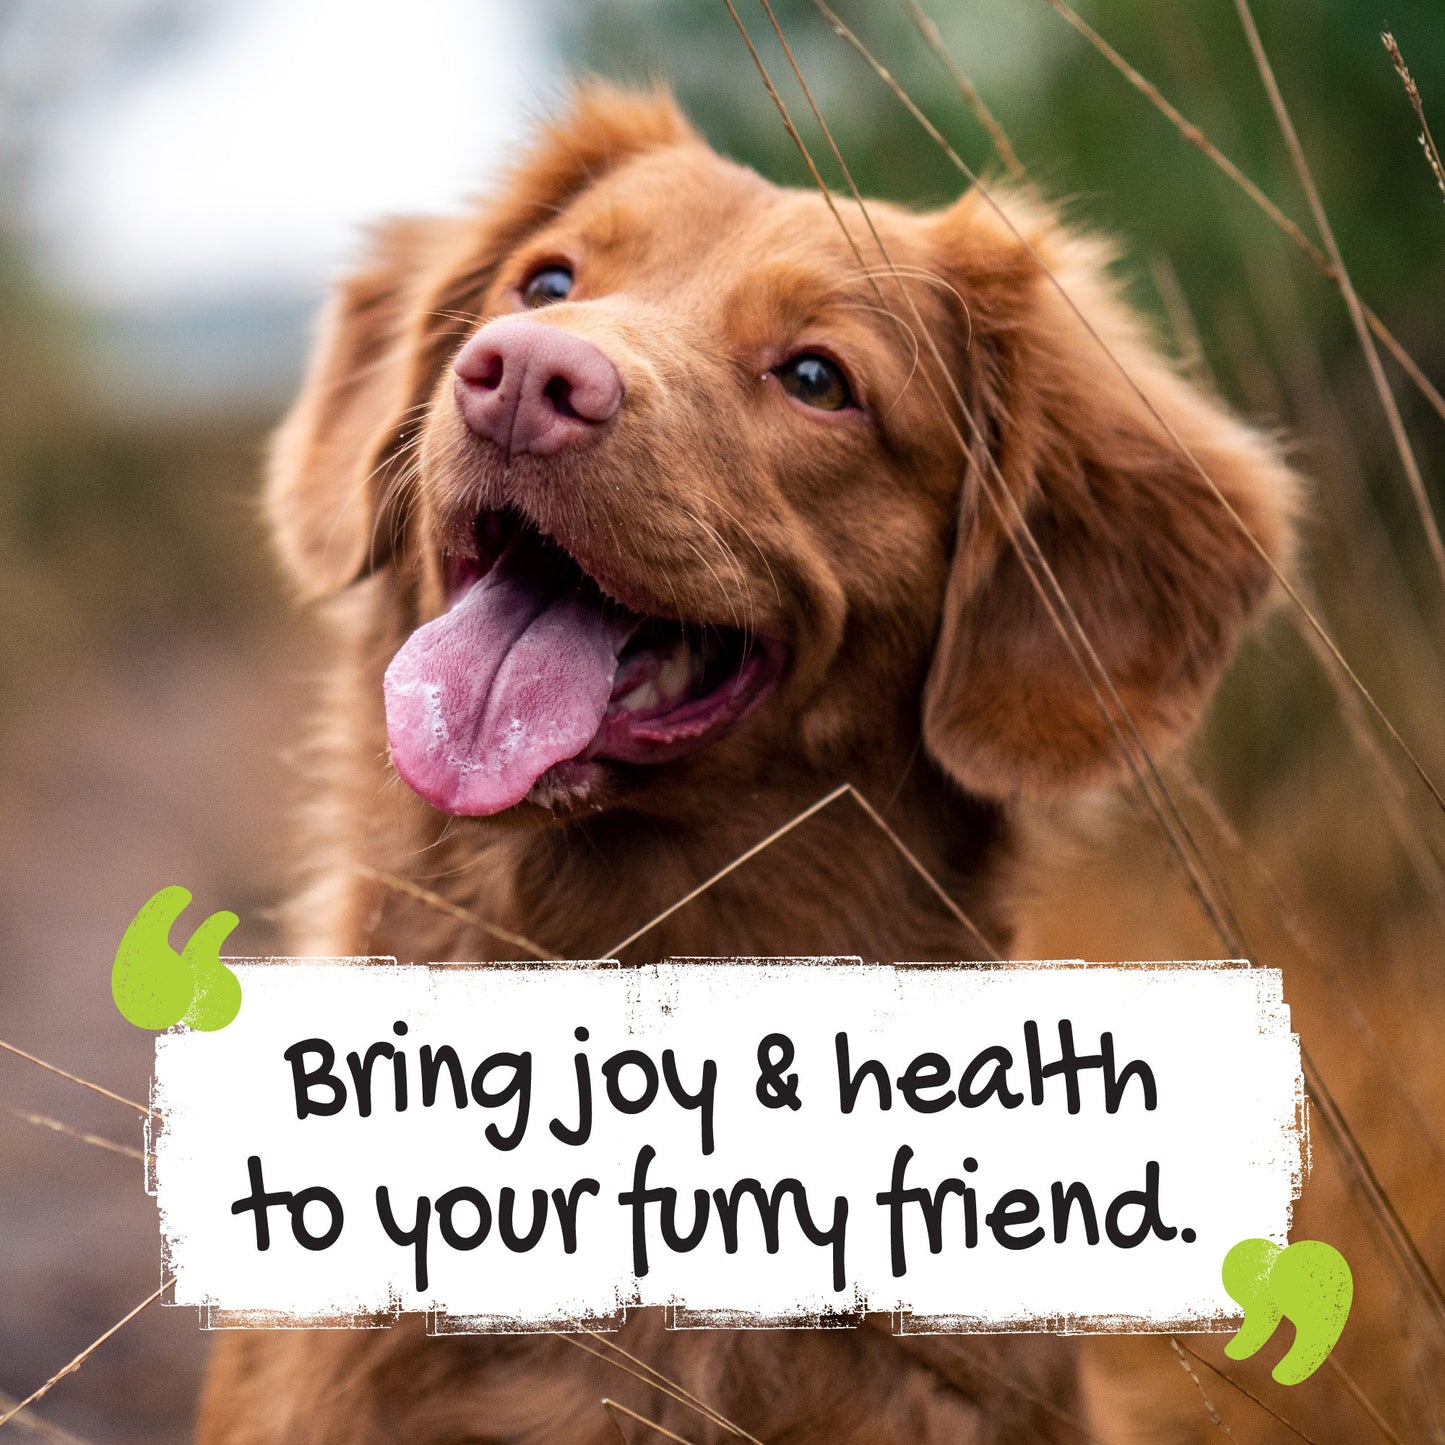 Chewer's Joy Roll'a Joint, Beef/Chicken Meat + Collagen Sticks + Turmeric,  4oz Dog Treats, High in Protein, Support Healthy Joints, Dental Hygiene, Boost Digestion, Turmeric Helps to Promote a Healthy Anti-Inflammatory Response.